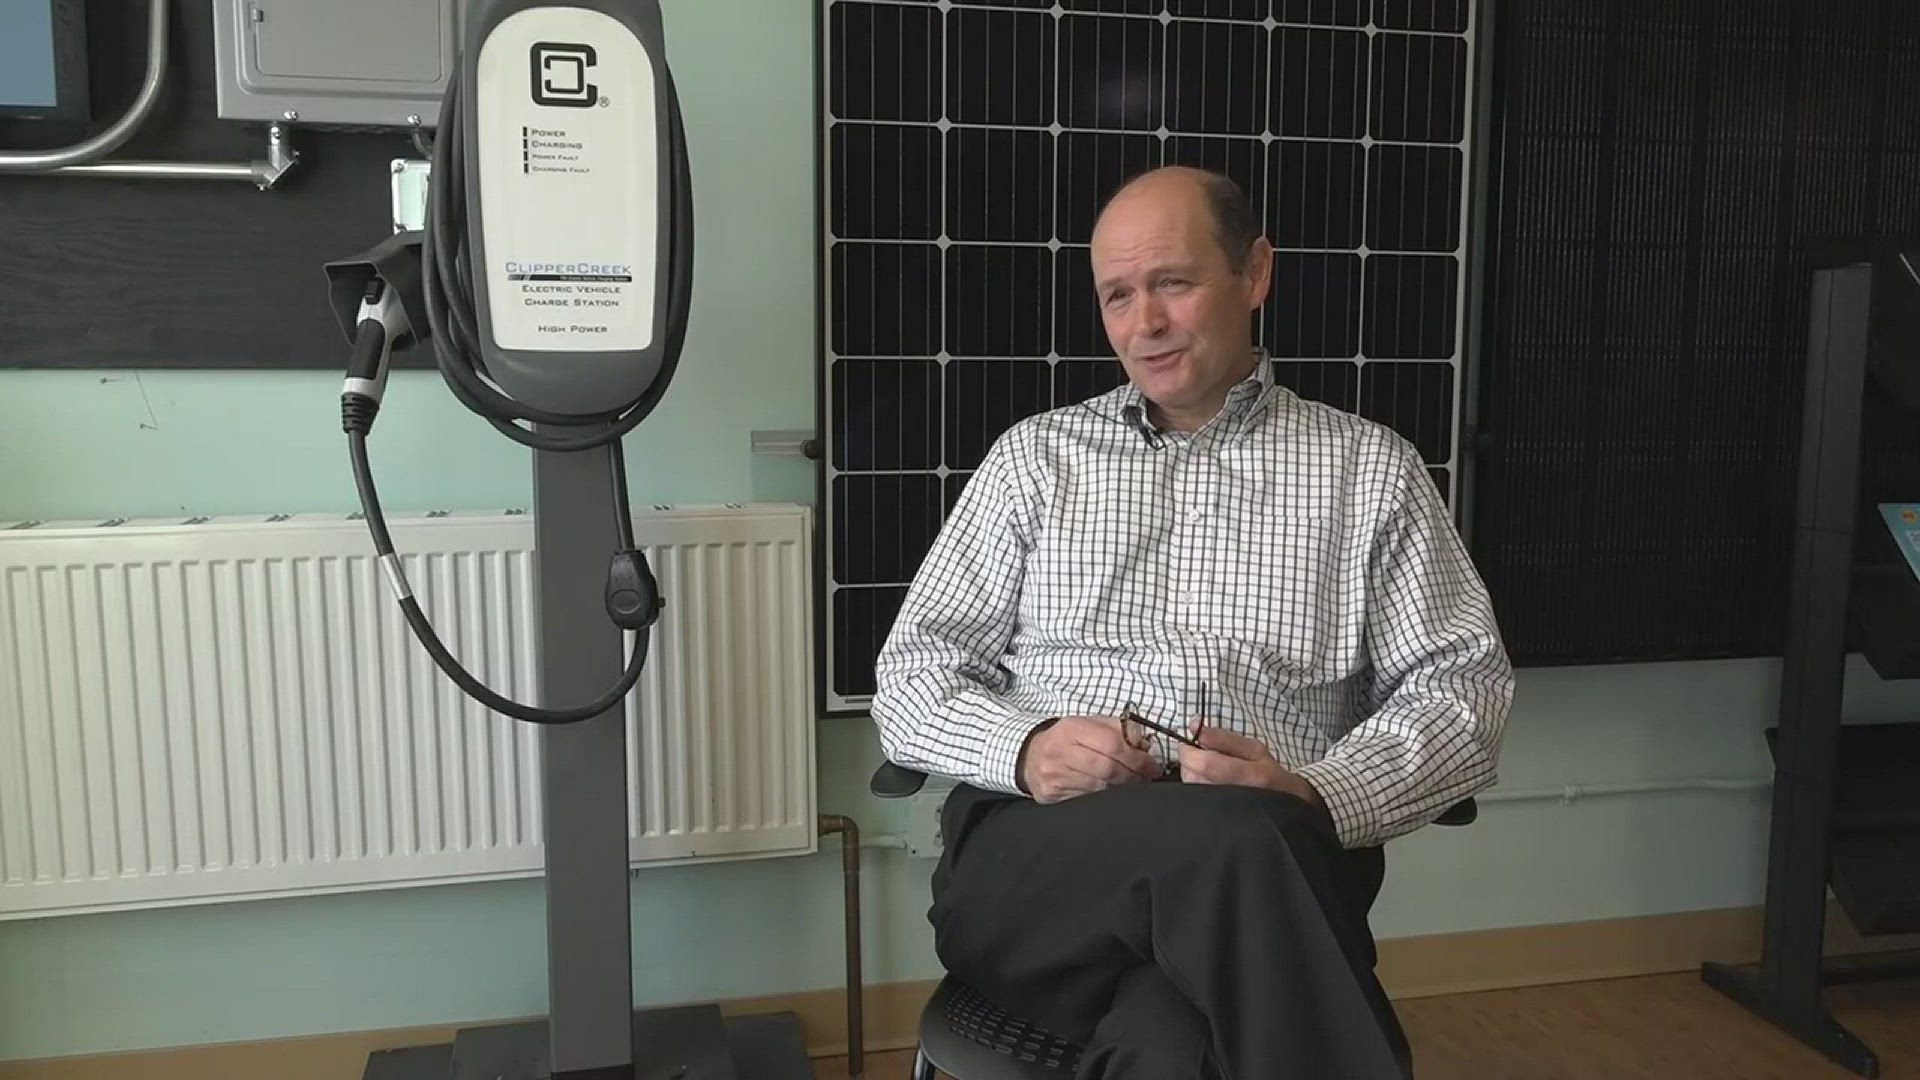 Barry Woods of Revision Energy explains what "range anxiety" is for those who drive electric vehicles.